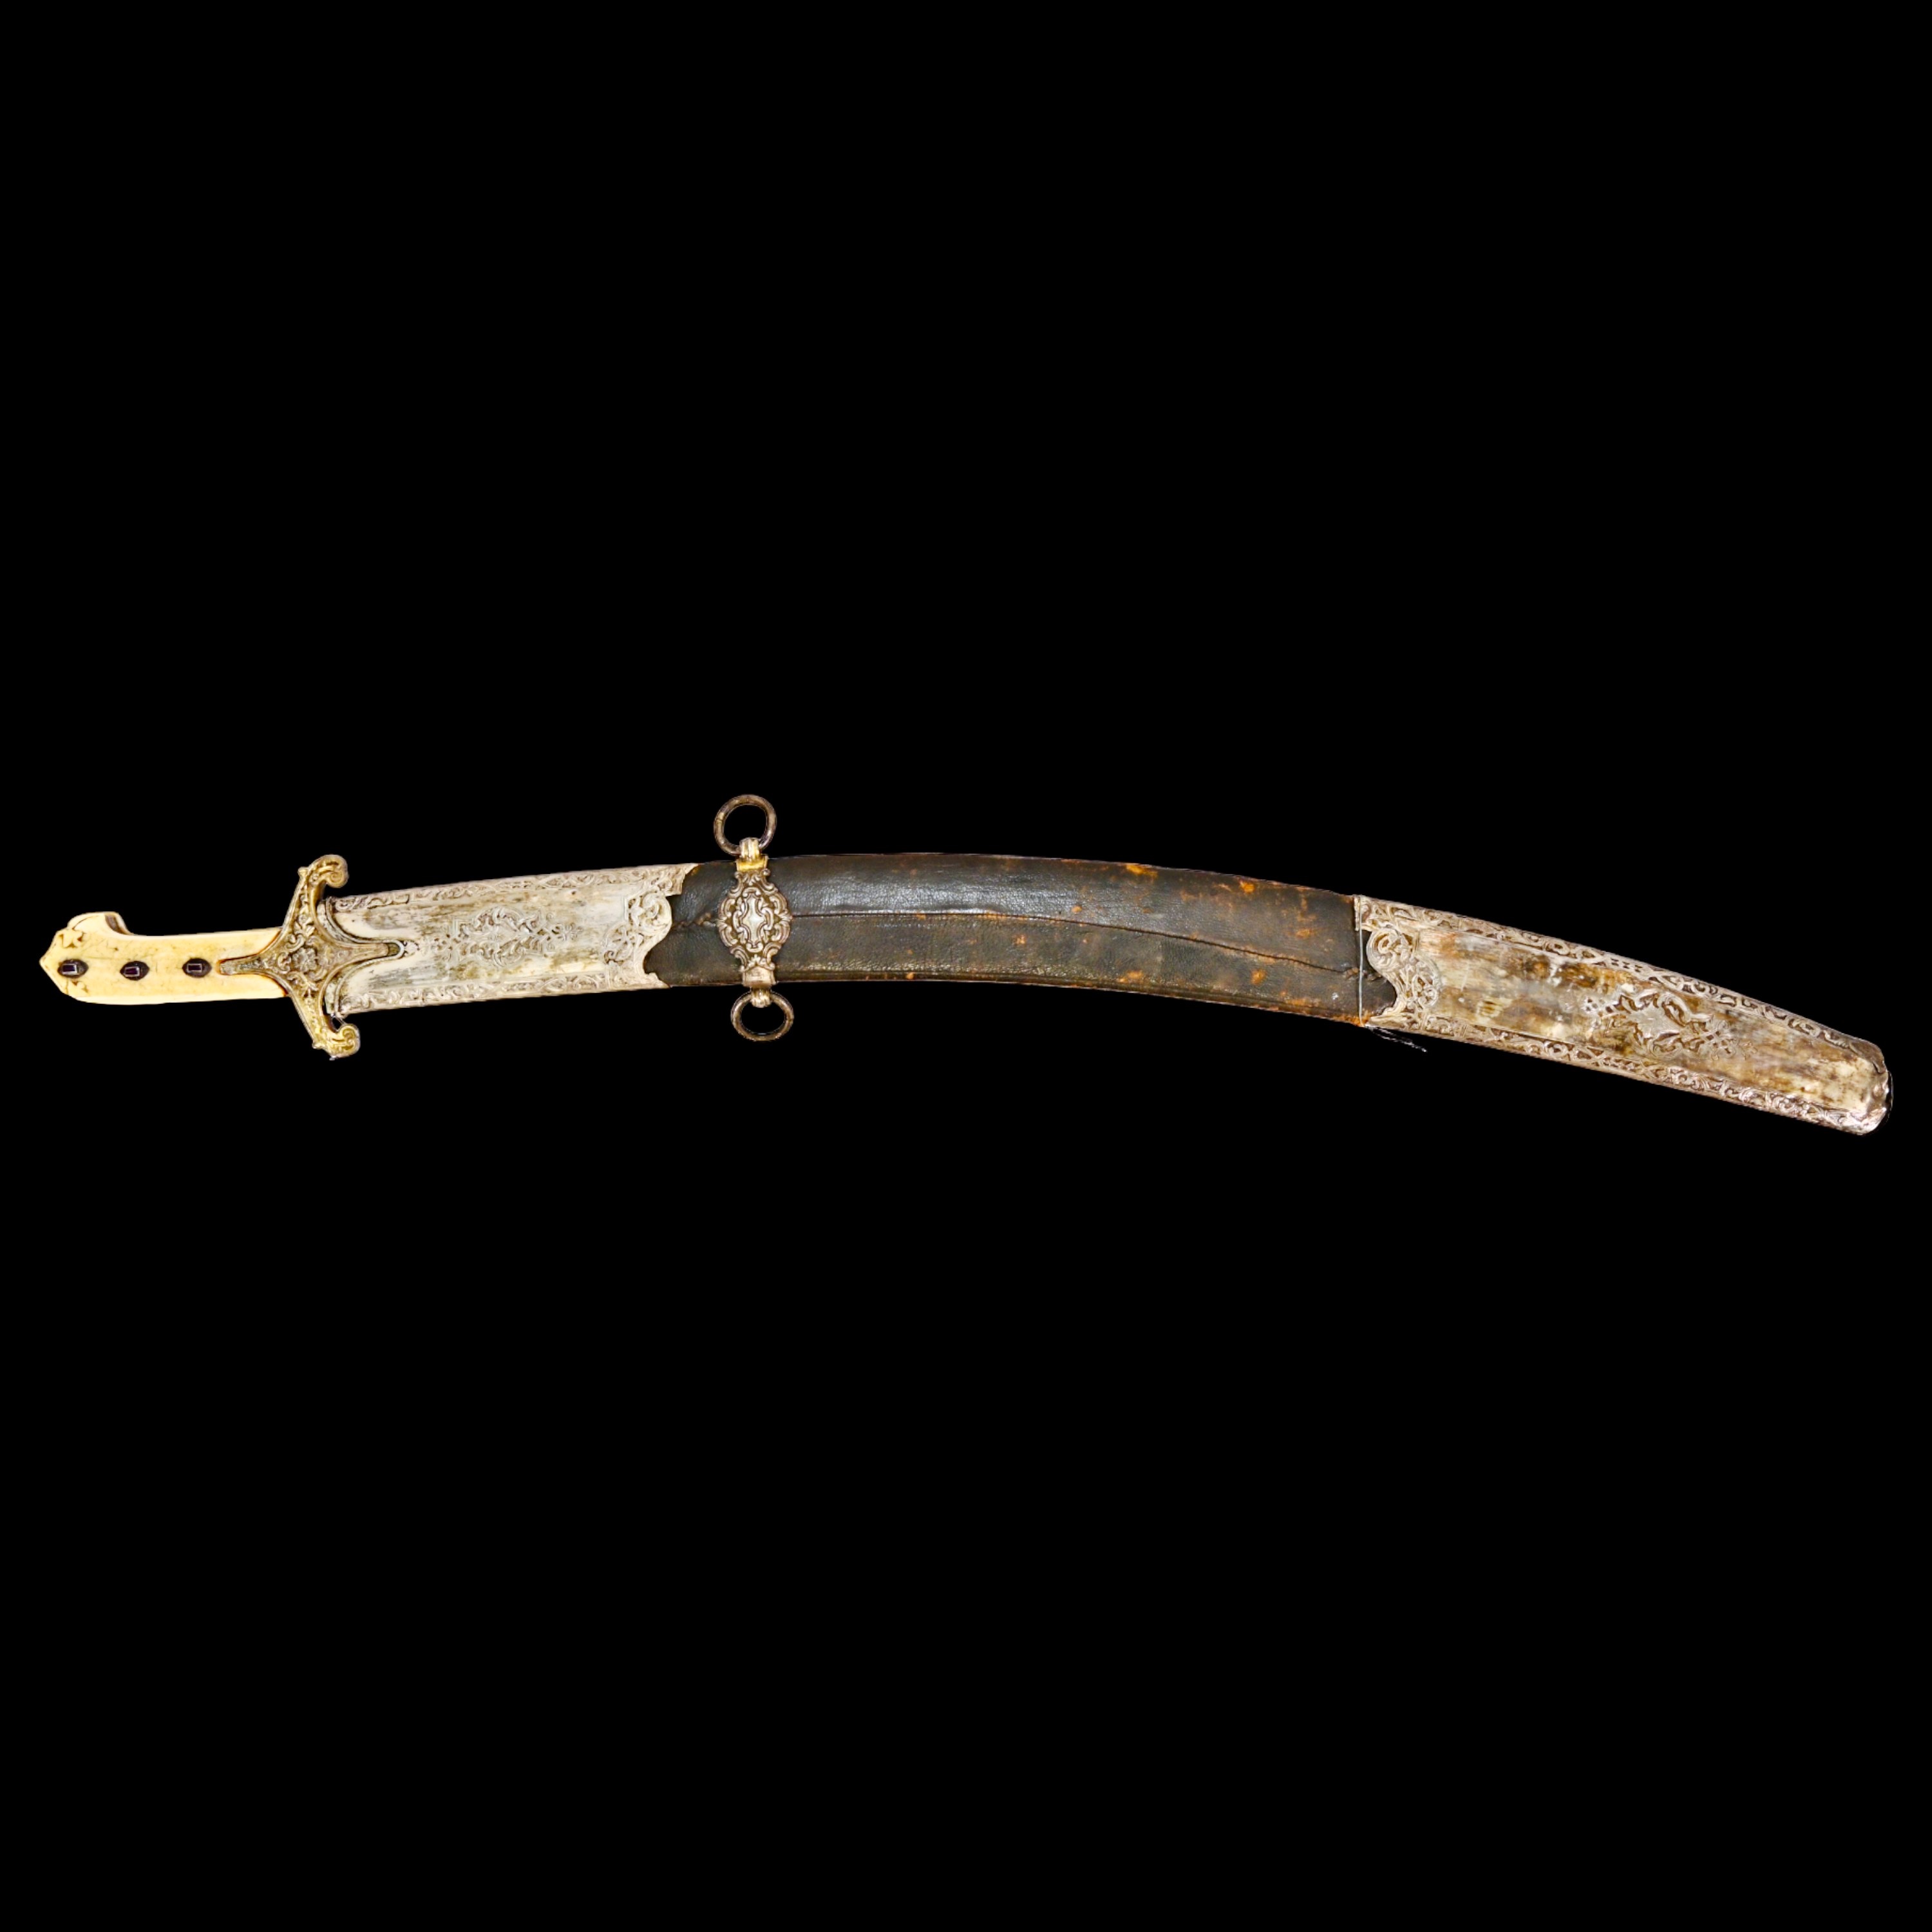 Rare Ottoman saber KARABELA, wootz blade, silver with the tugra of Sultan Ahmed III, early 18th C. - Image 2 of 27